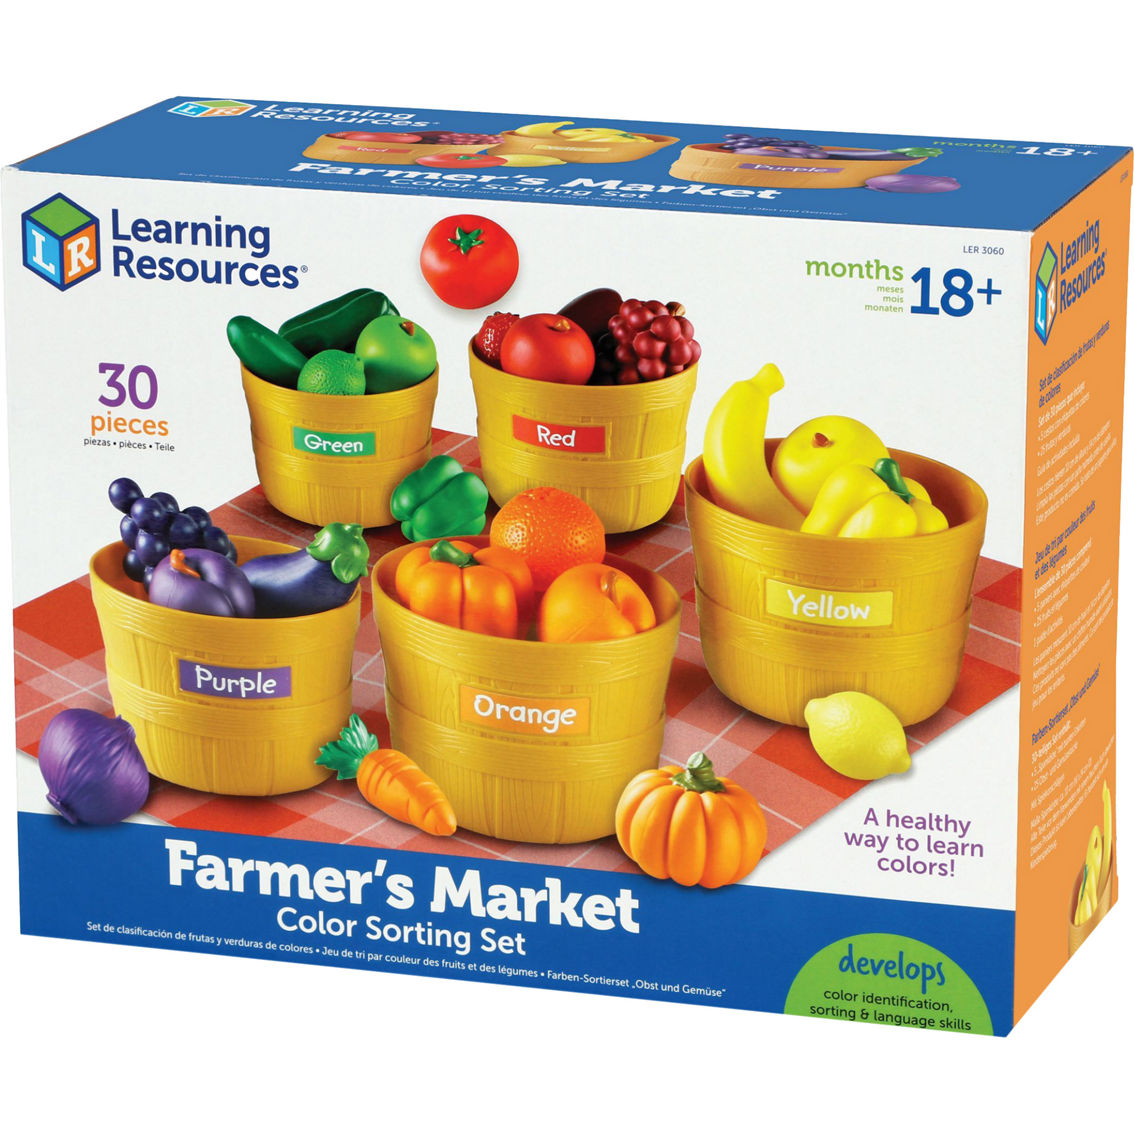 Learning Resources Farmer's Market Color Sorting Set - Image 2 of 5